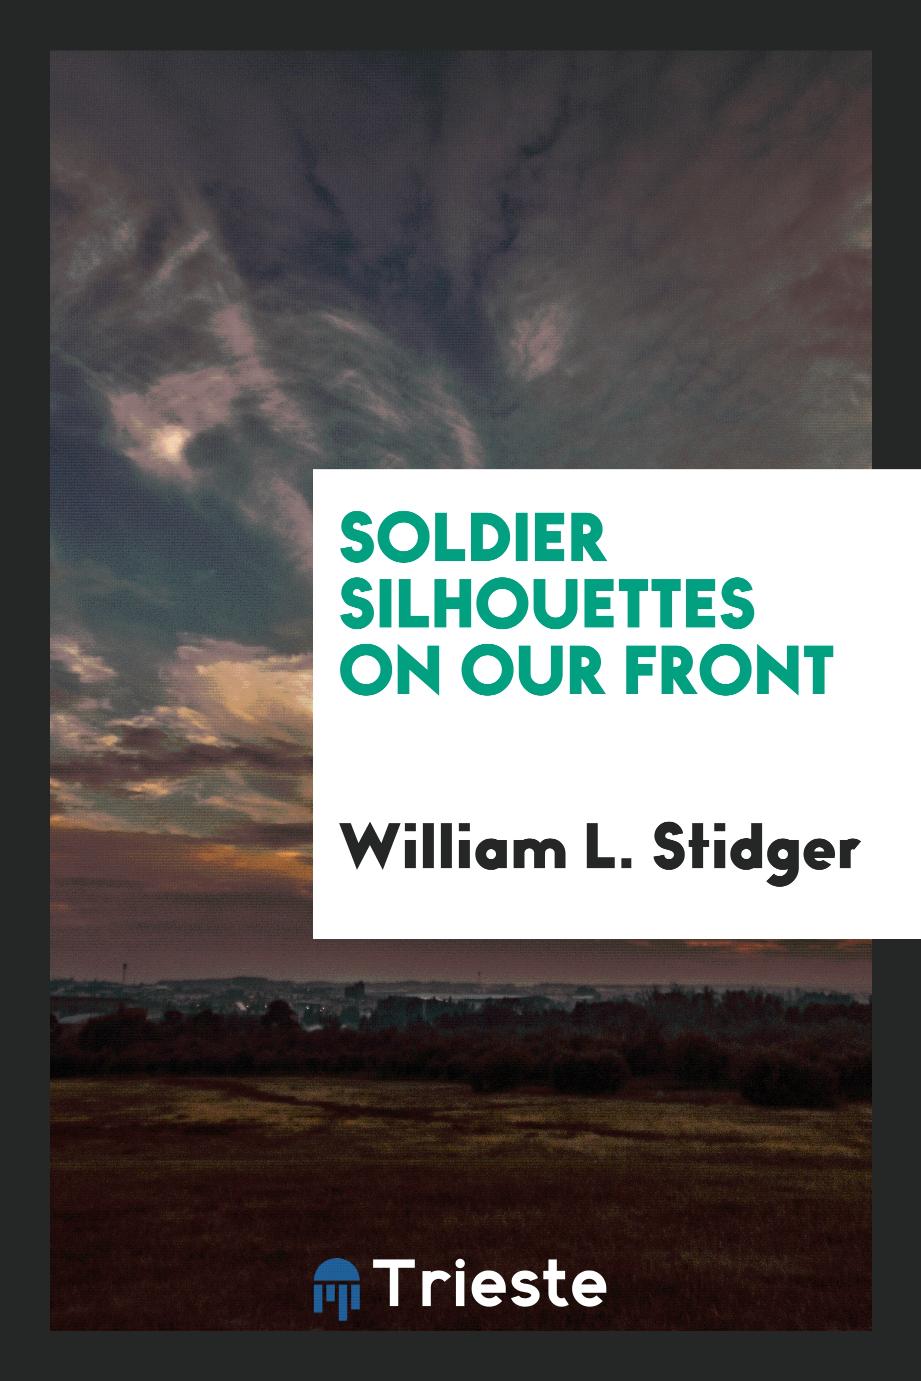 Soldier silhouettes on our front